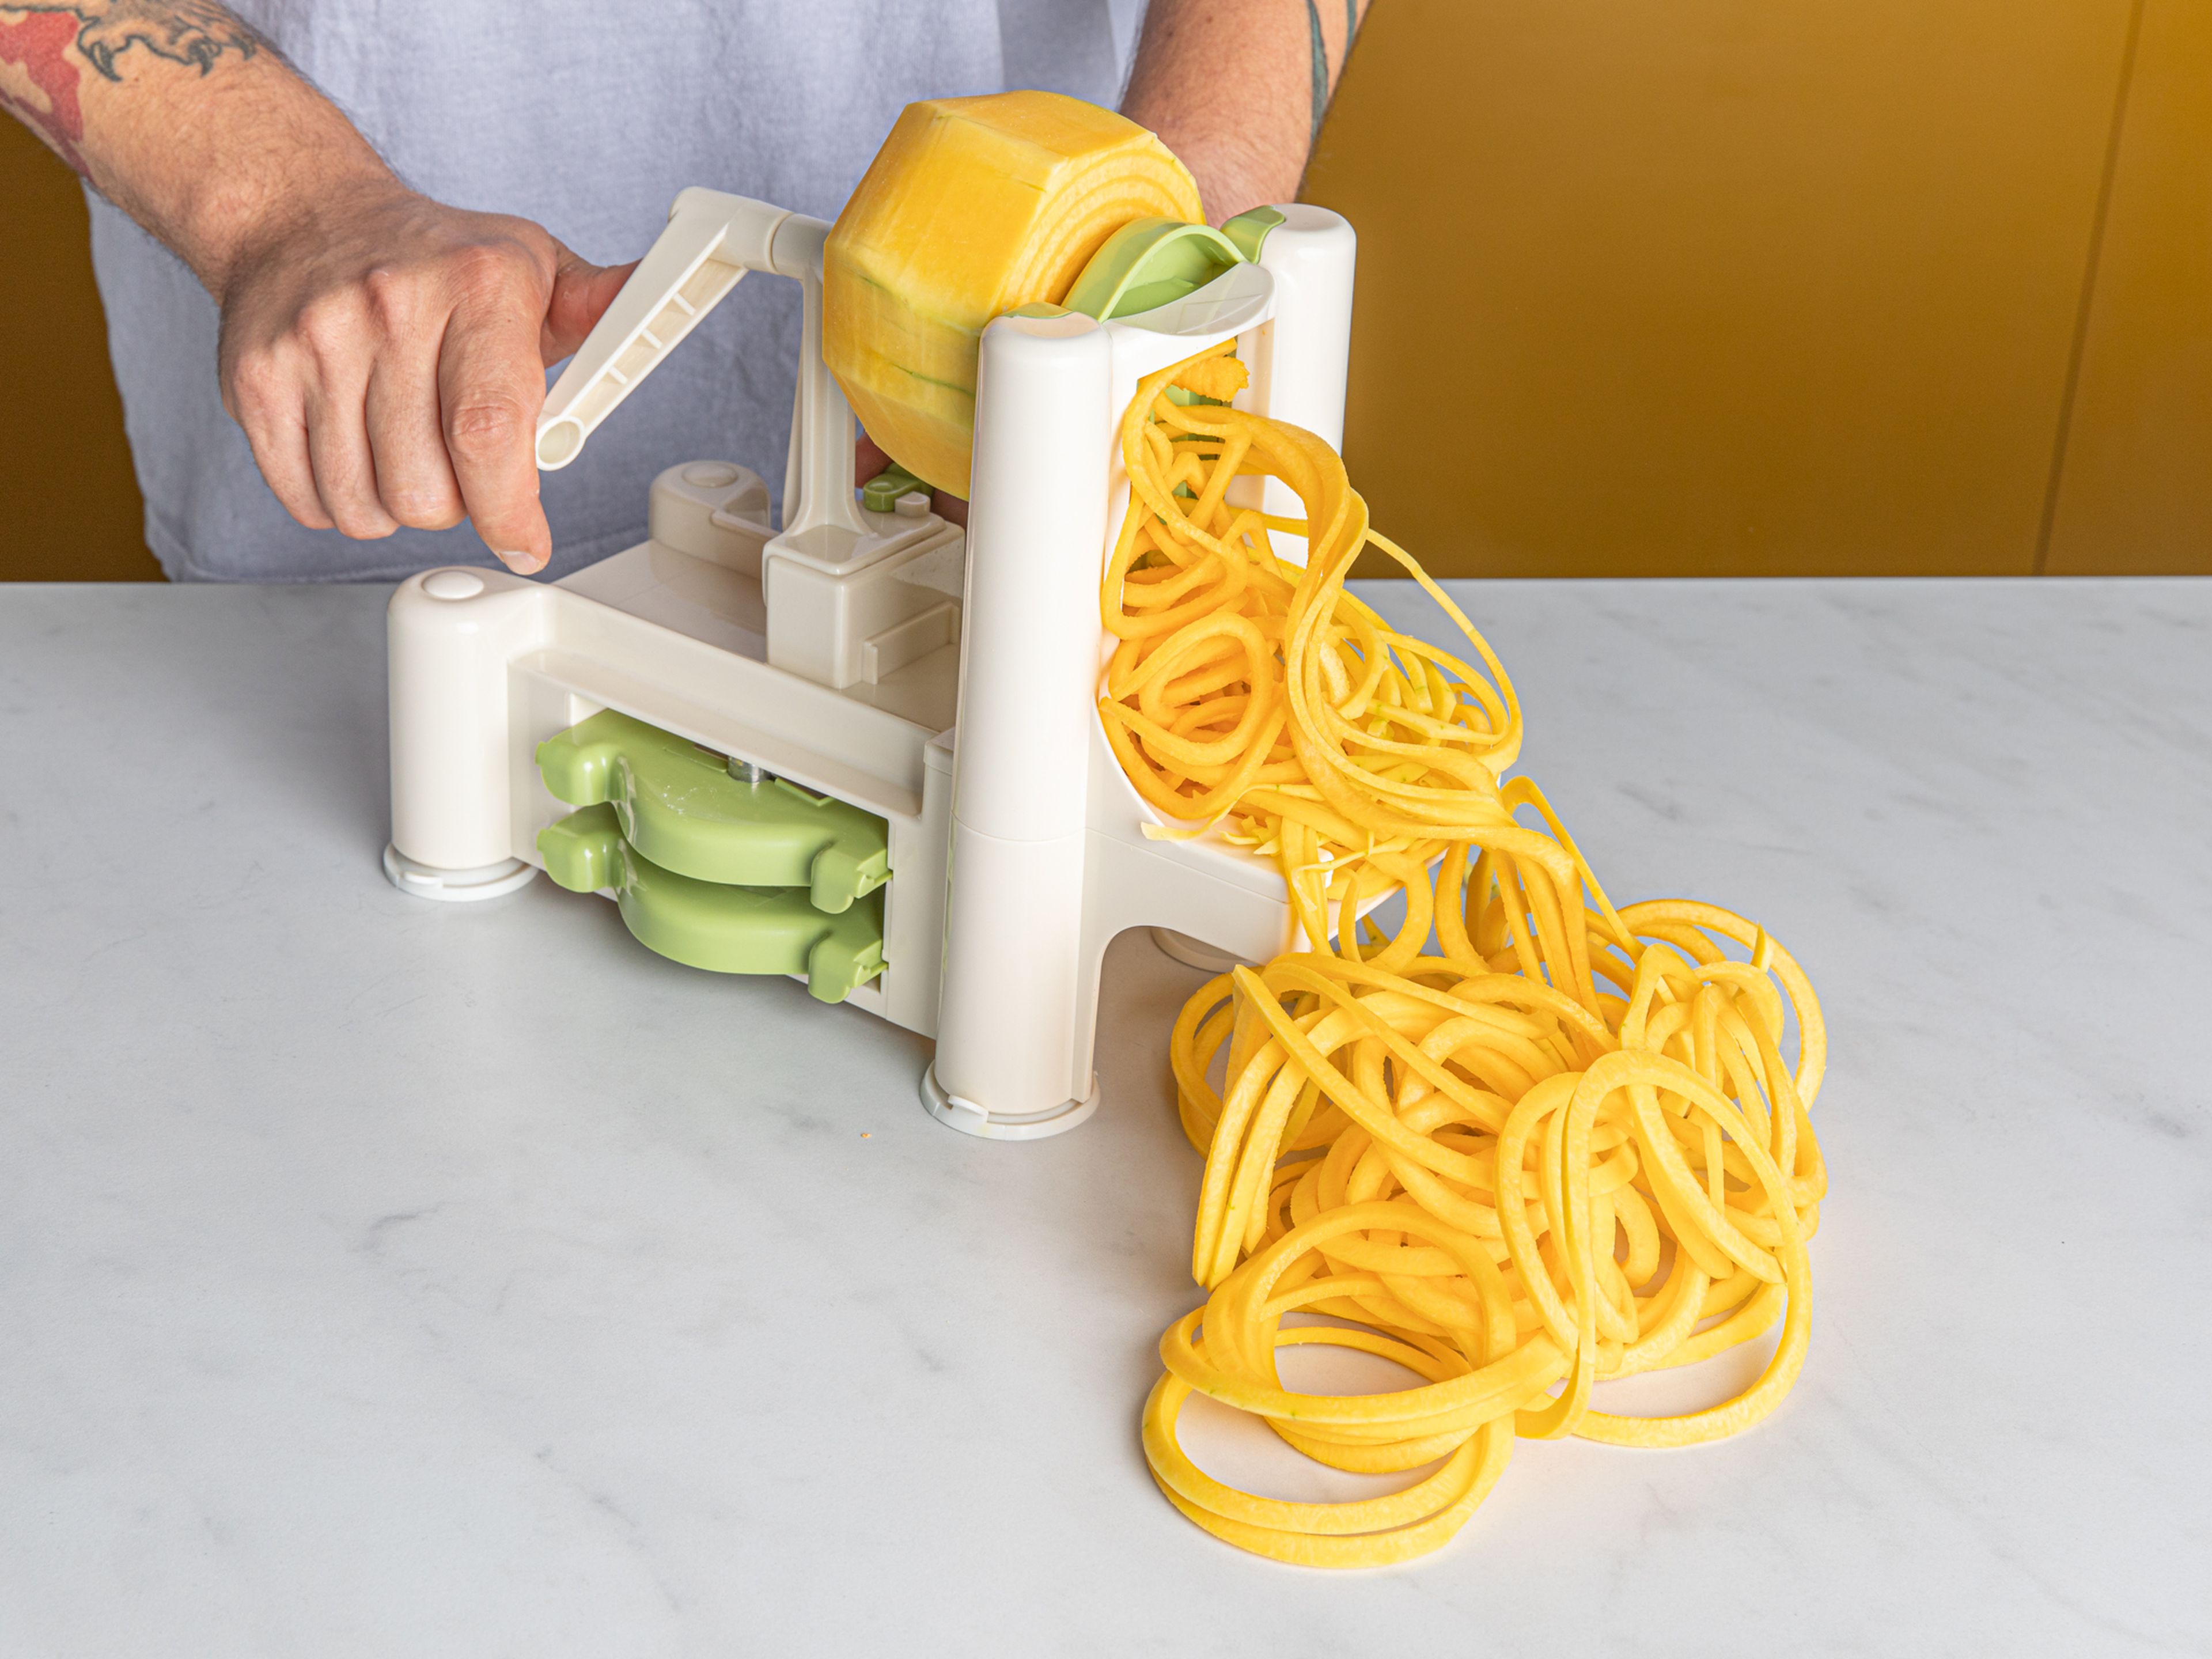 Peel squash and spiralize into noodles.